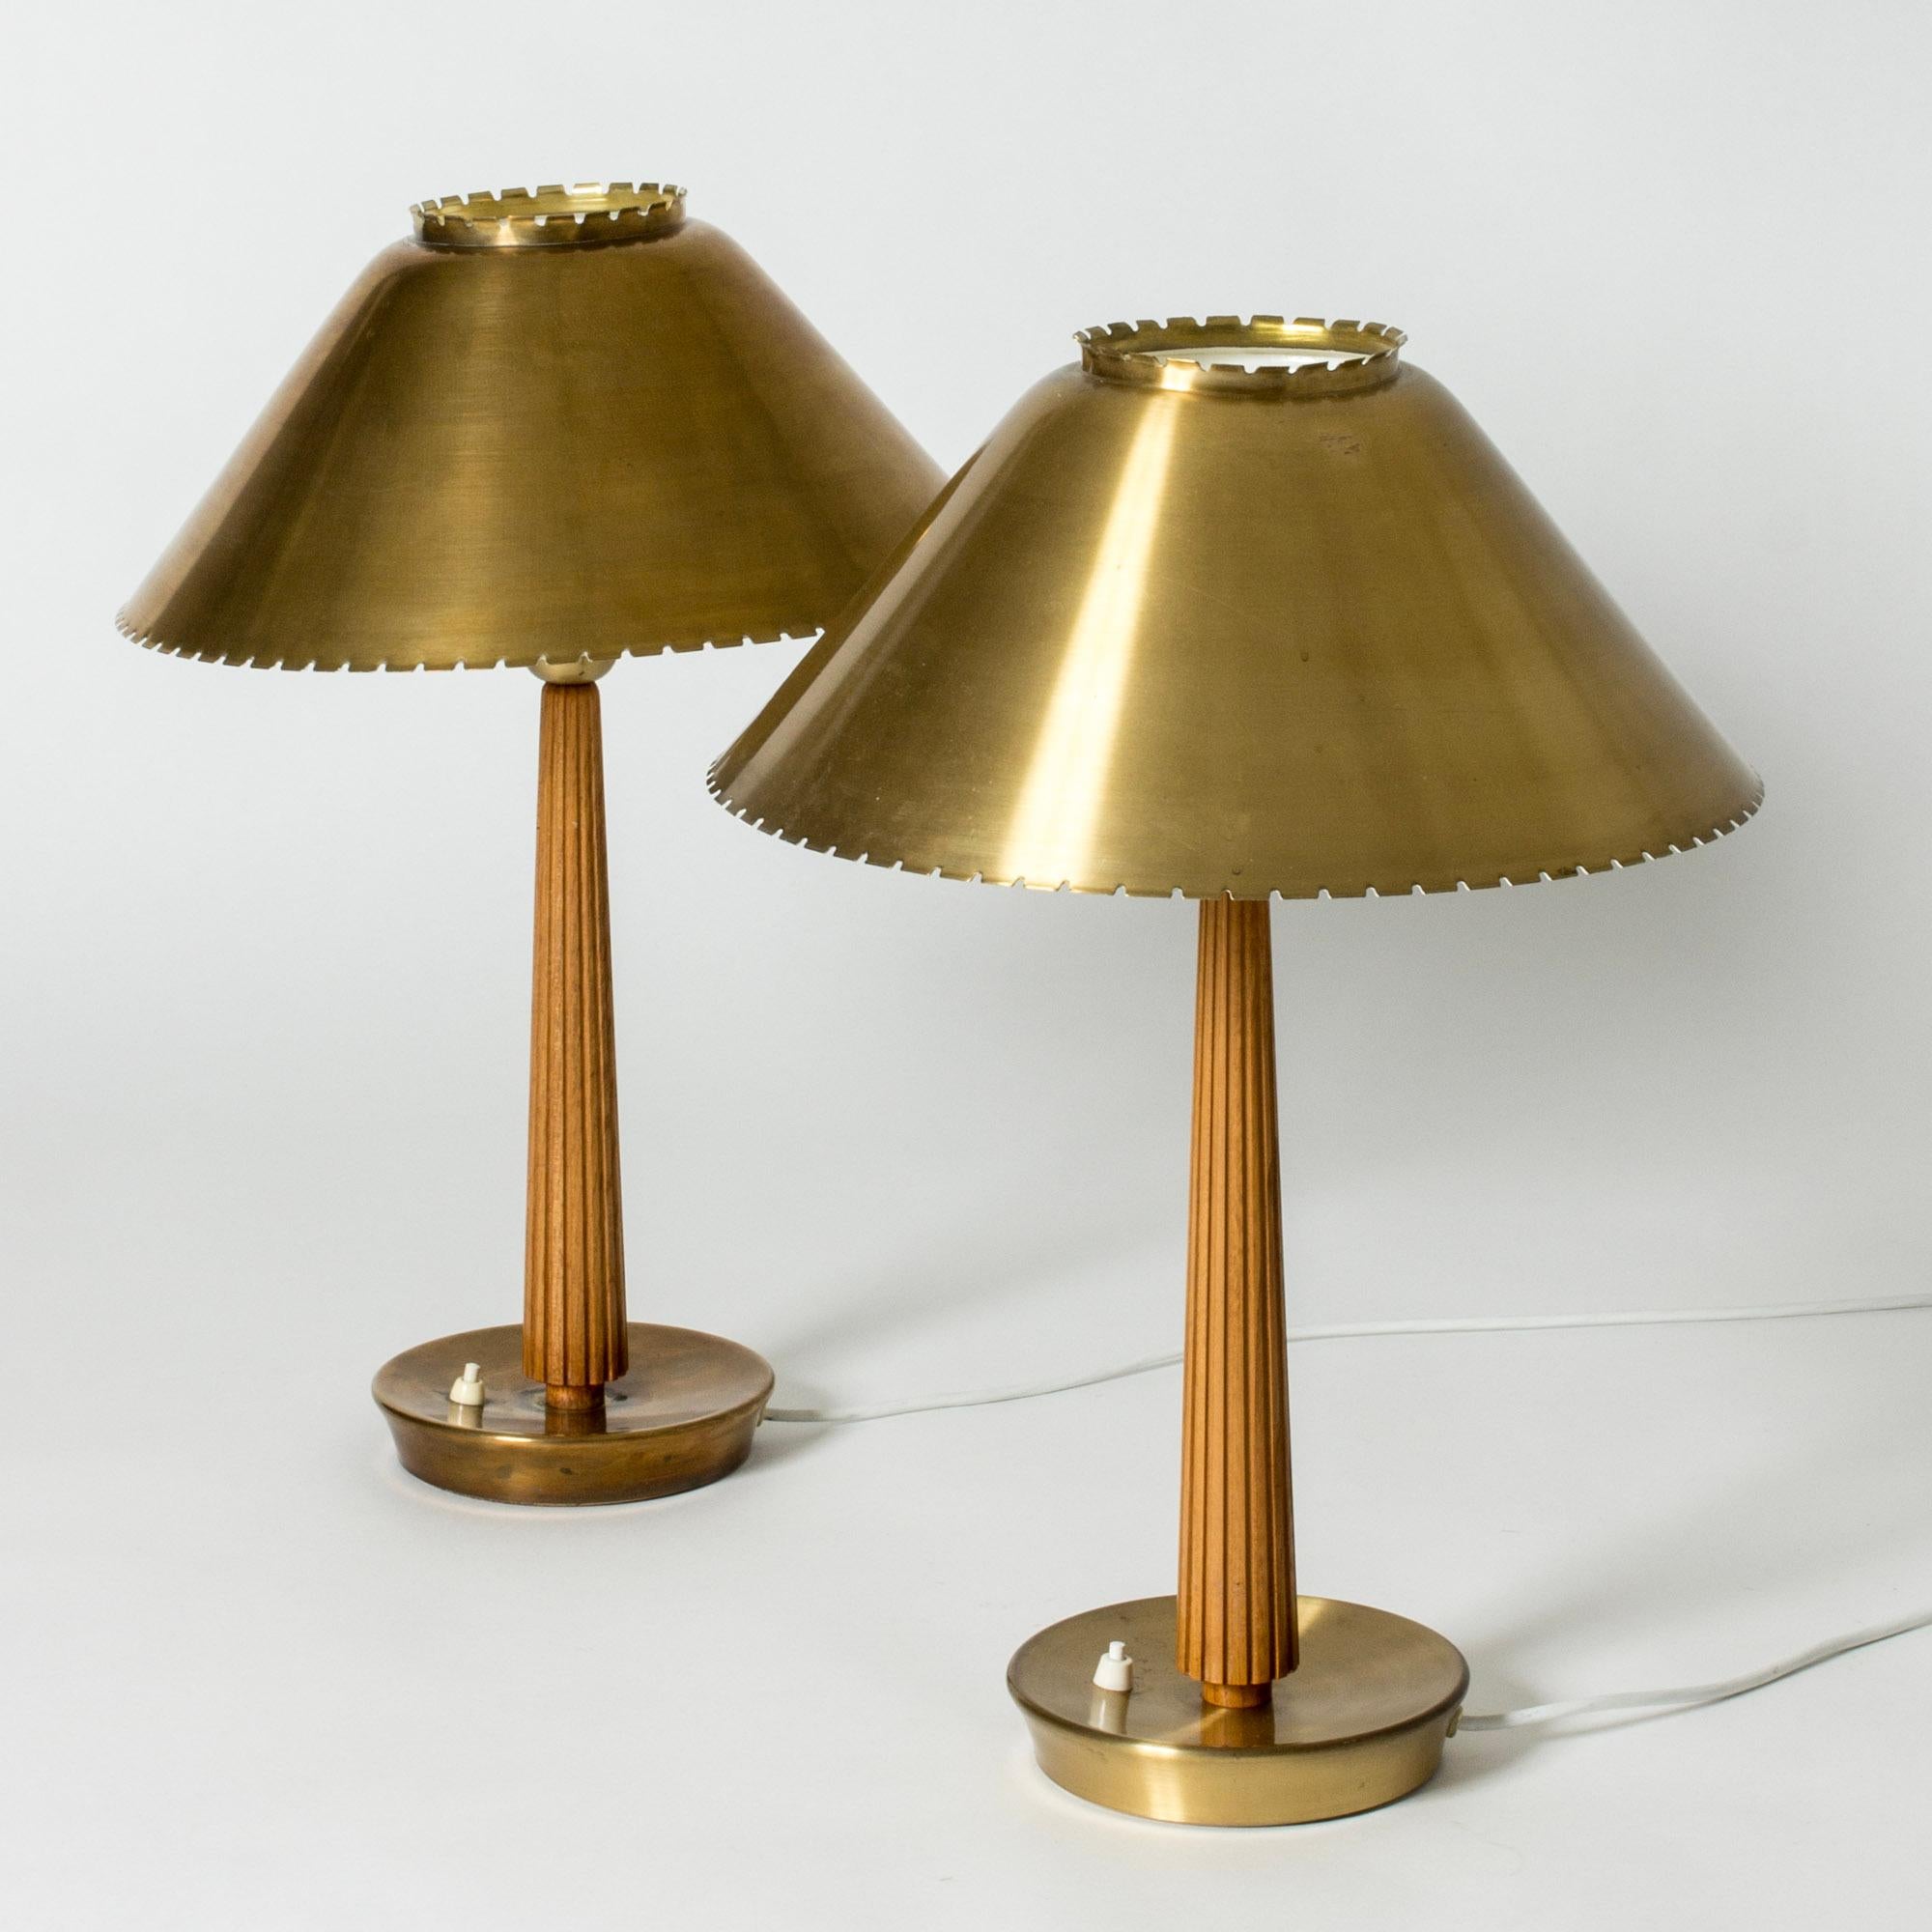 Pair of beautiful table lamps by Hans Bergström, made from brass and mahogany. Scalloped edges around the top and bottom of the shades. Handles embossed with decorative stripes.

Hans Bergström was the owner and creative director of the lighting